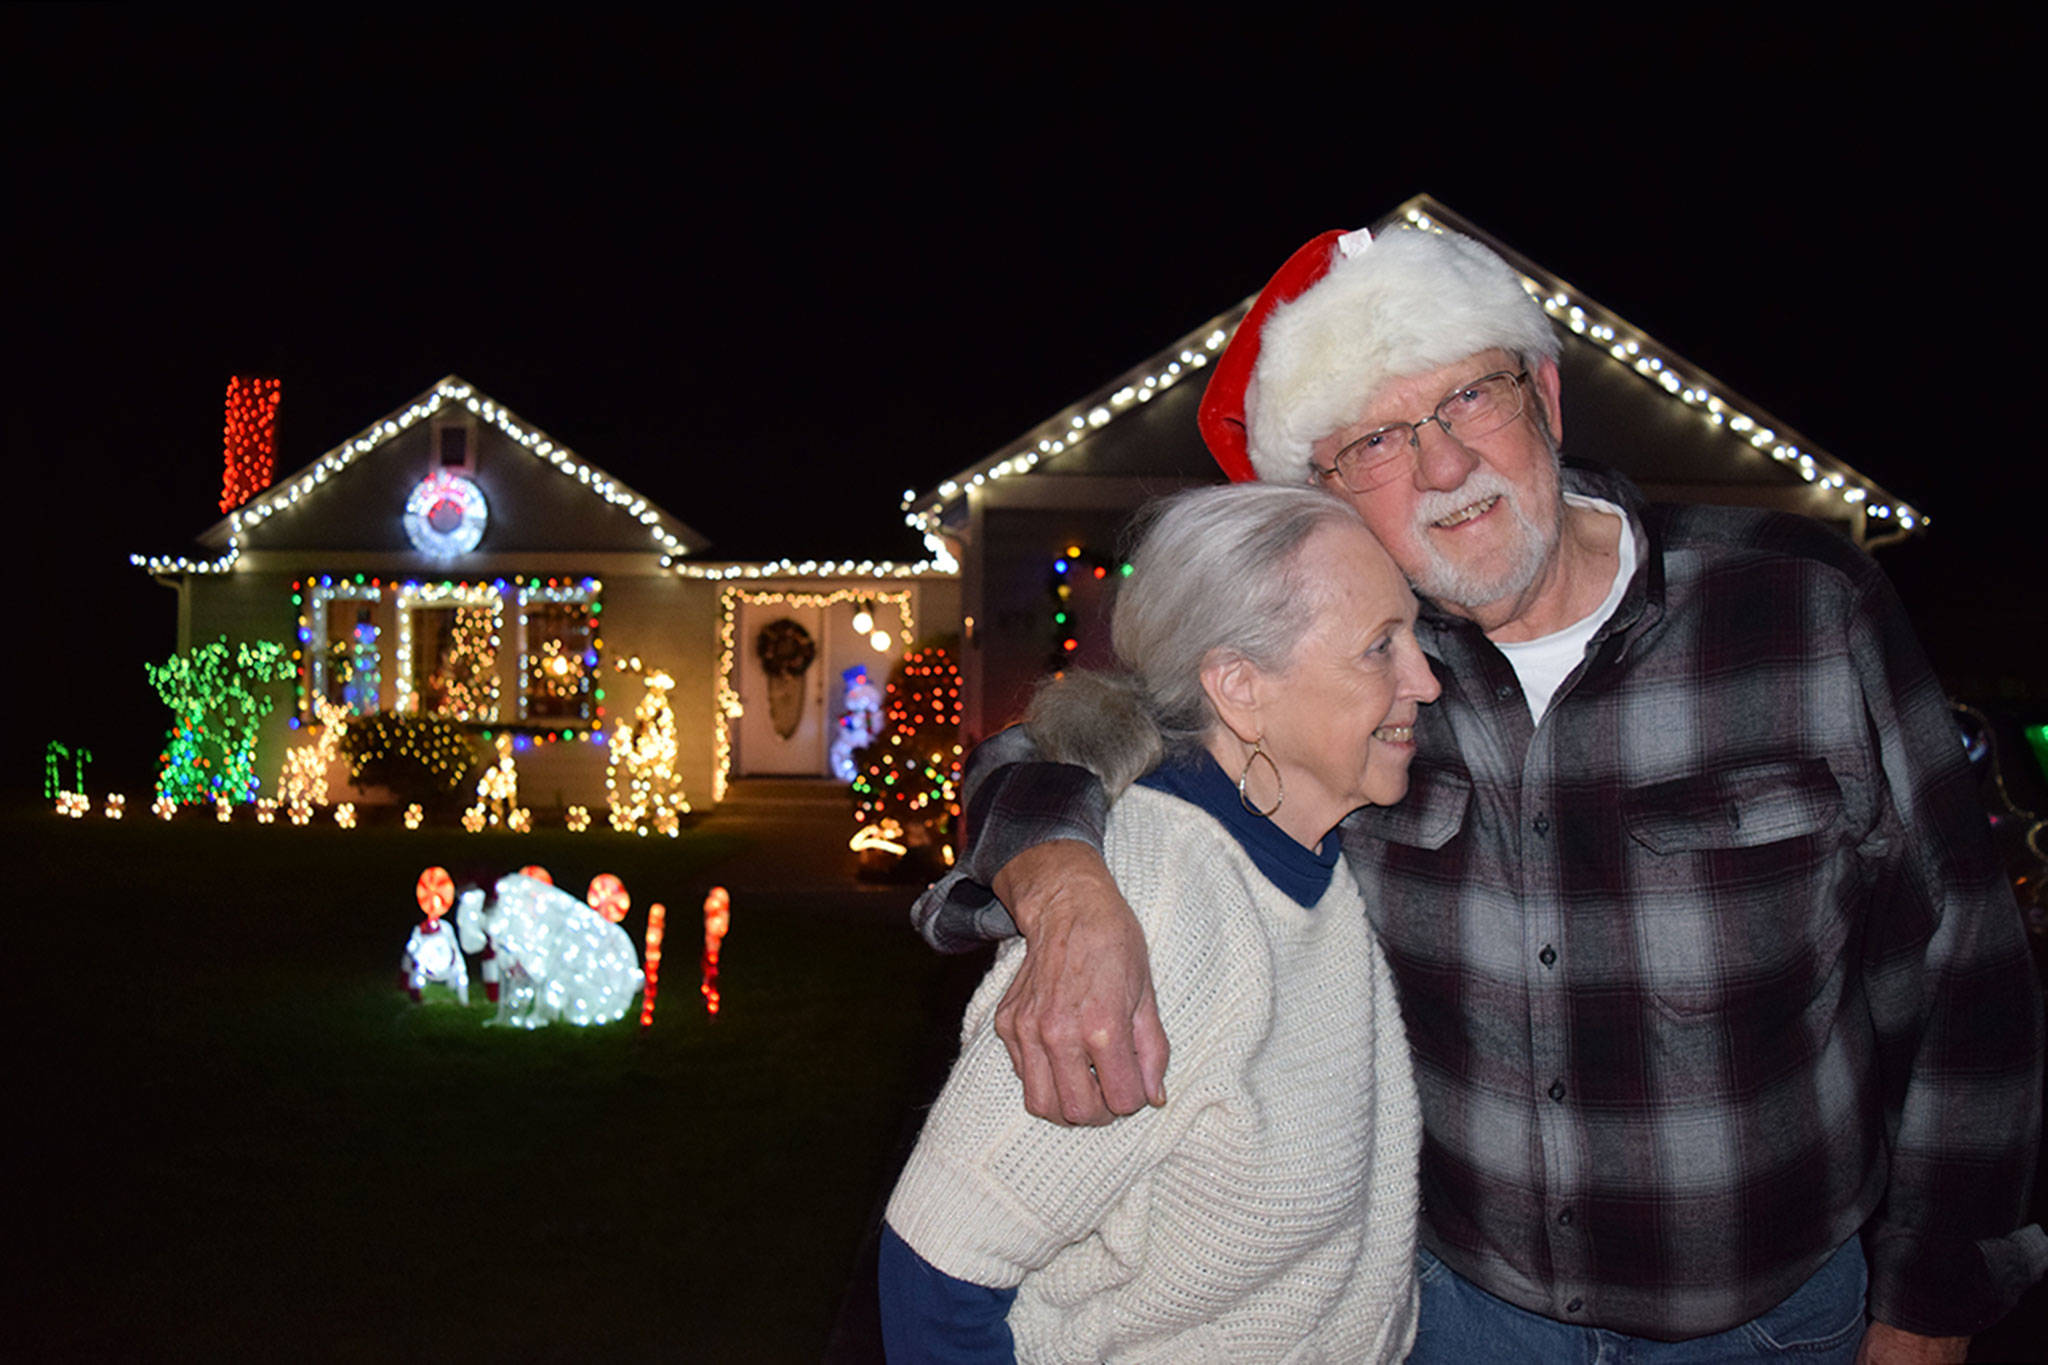 Linda and Dale Erickson put up a Christmas light display at their house off W. Sylvester Court since they moved to Sequim in 2000. It is a tradition they’ve carried on every year since they both retired and pays homage to raising their three sons. “My boys always loved the lights,” Dale said. Sequim Gazette photo by Erin Hawkins